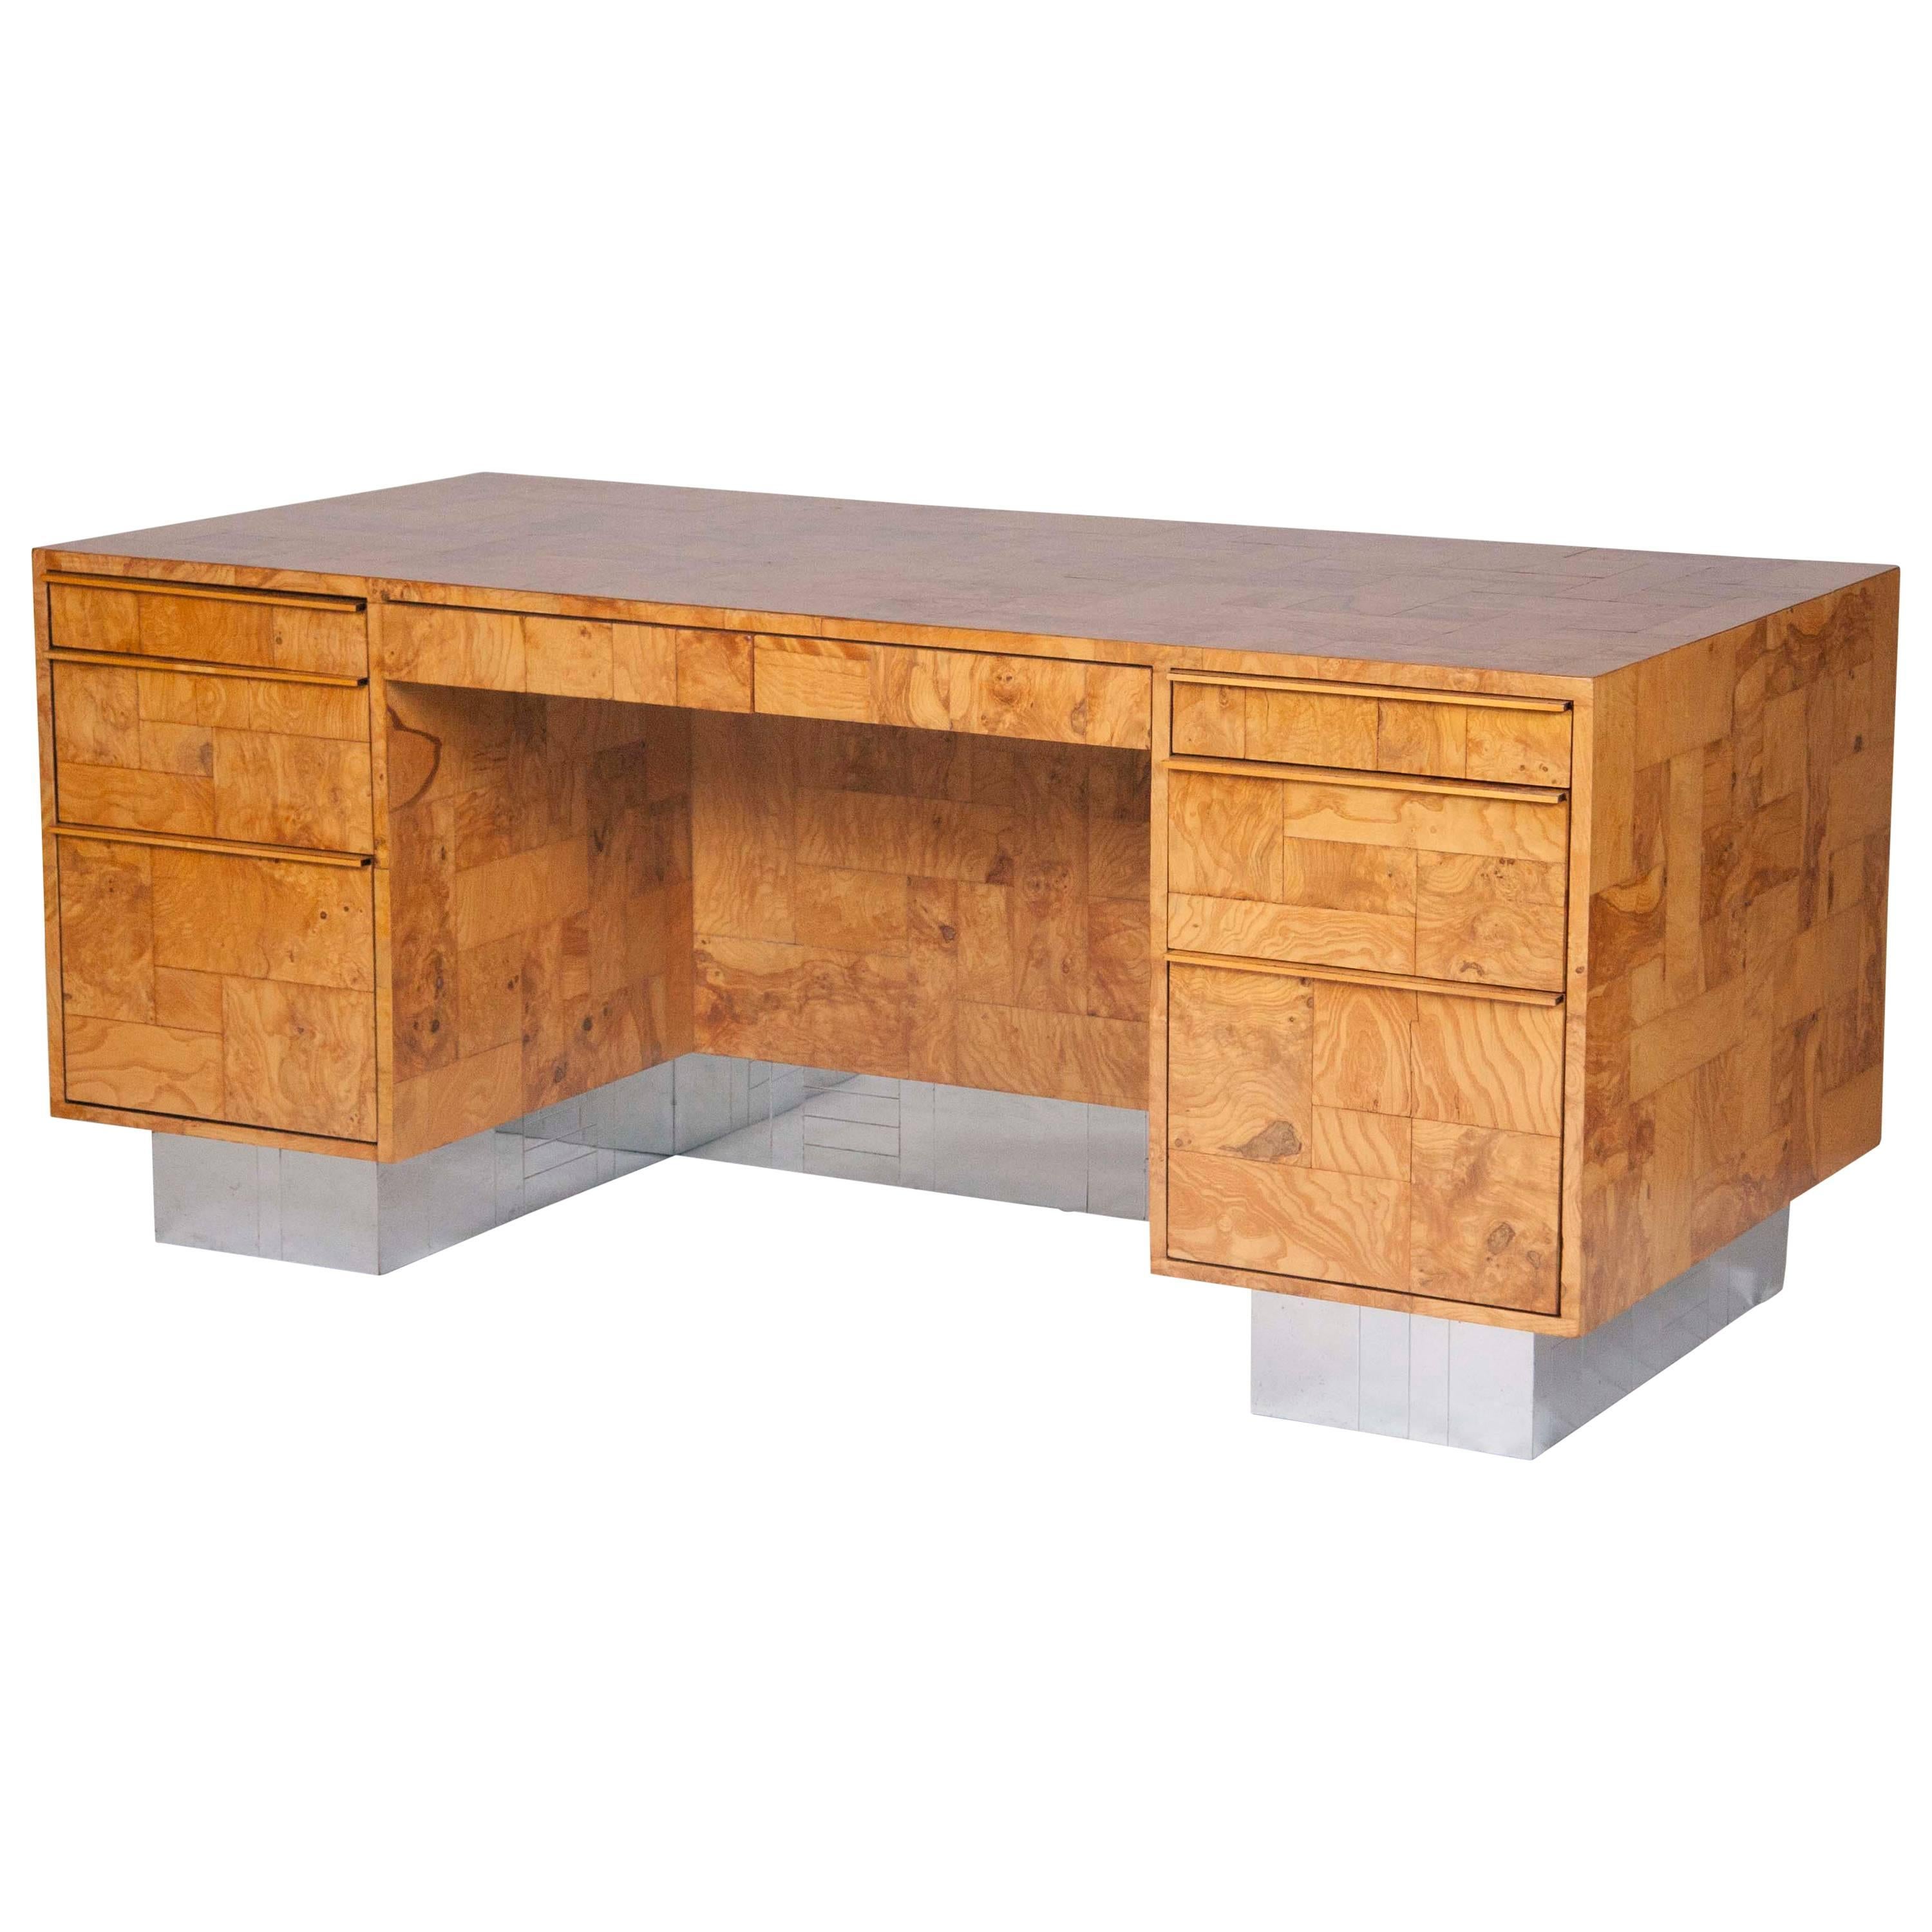 Signed Desk Designed by Paul Evans in the Cityscape Style